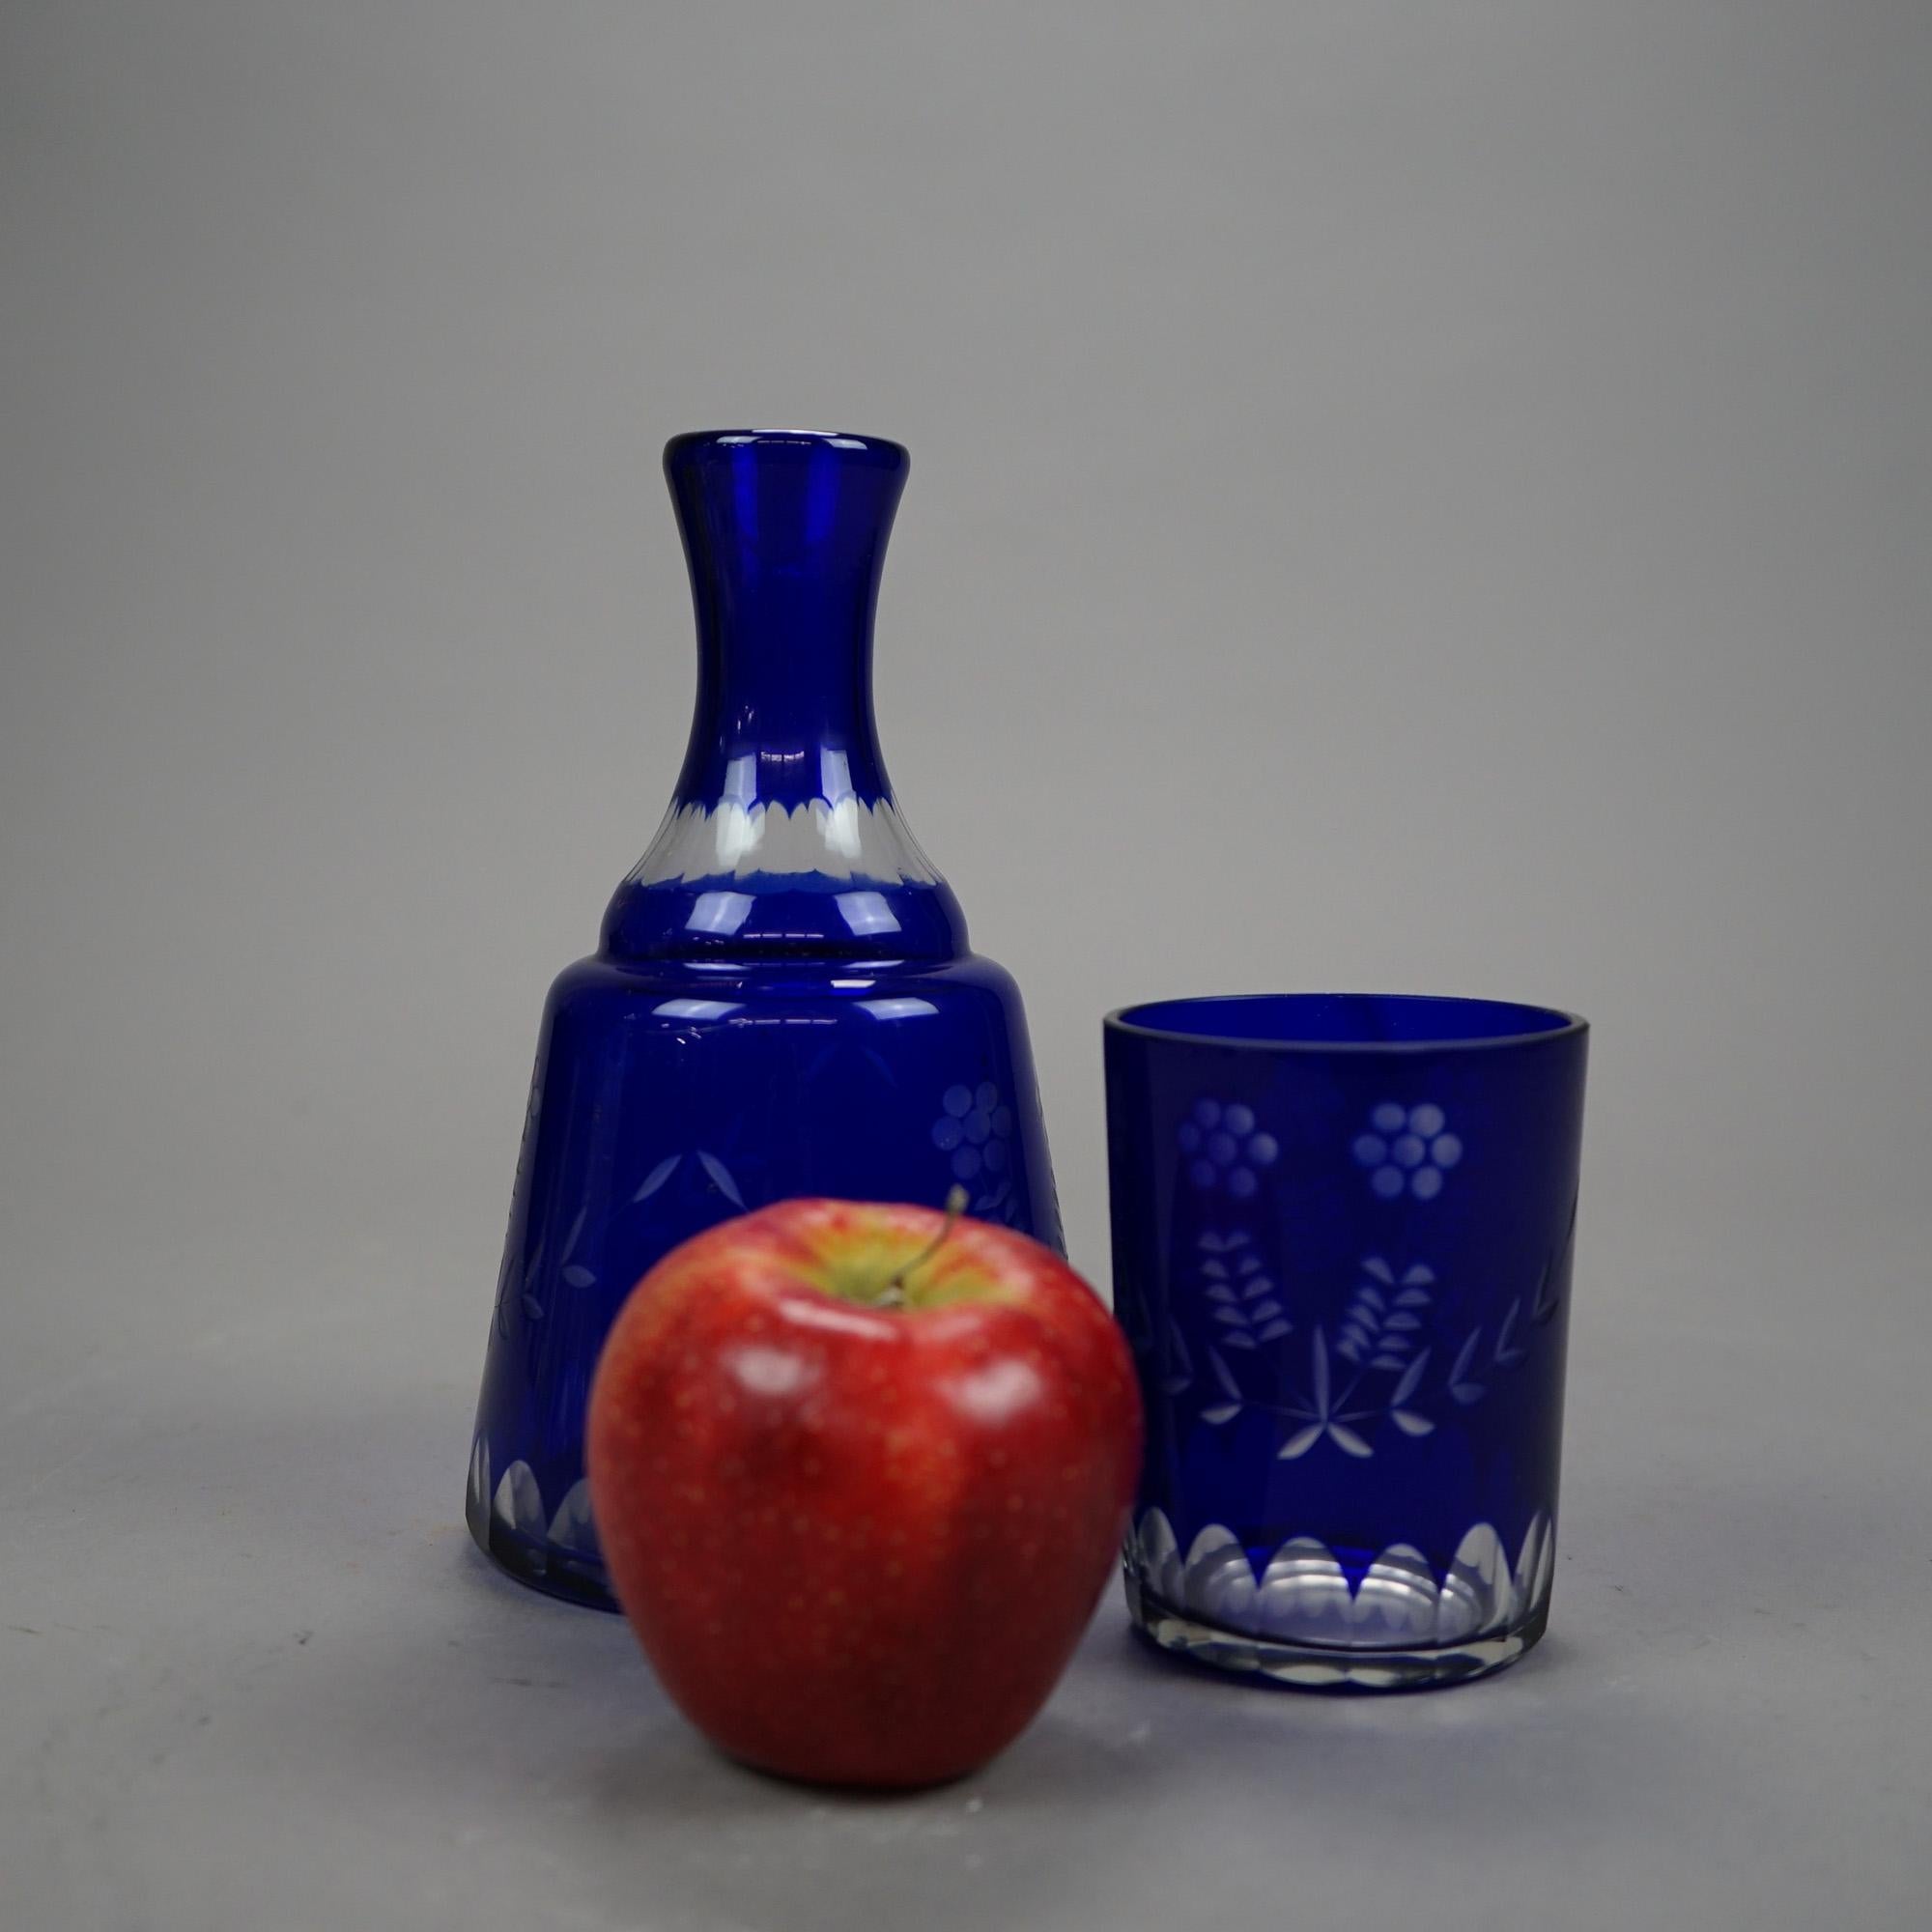 A Bohemian tumble up set offers cobalt cut to clear glass with floral decoration and includes tumbler and glass, circa 1920

Measures - decanter 7.75''H x 4.5''W x 4.5''D; glass 4''H x 3''W x 3''D.
 
Catalogue Note: Ask about DISCOUNTED DELIVERY